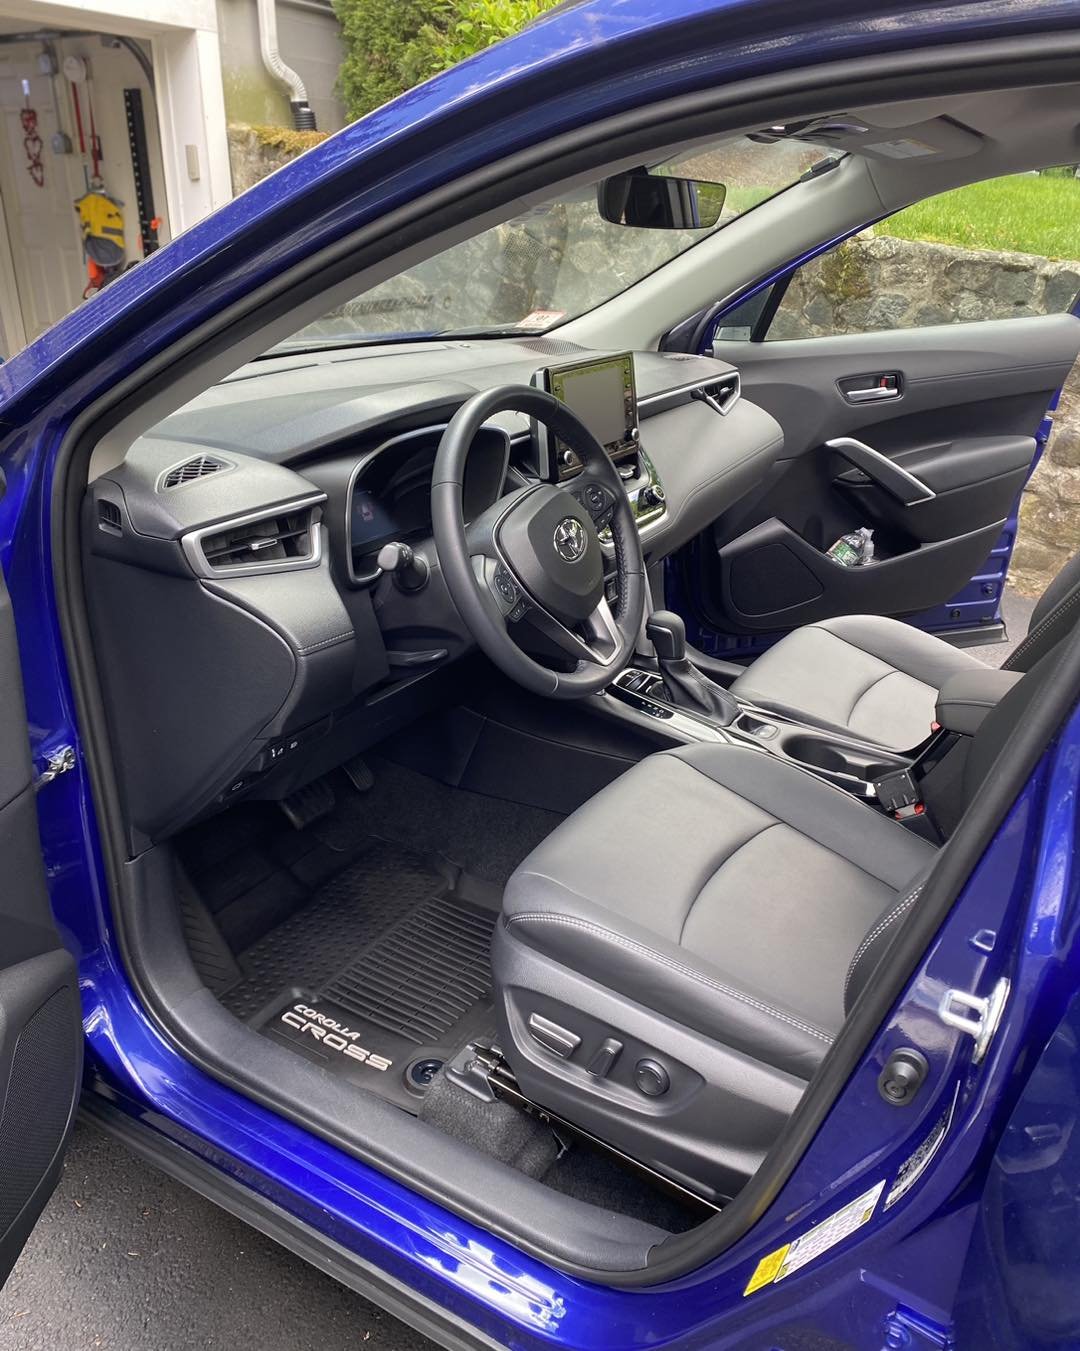 Toyota Corolla Cross got an interior detail 

&bull;
&bull;
&bull;

📍Mobile Detailing serving Boston Metrowest

📱Online Booking Available/DM or contact 508-244-8087

🏆5 Star Rating
🏆Fully Mobile 
🏆Professional Detailing 

#detailing #detailingwo